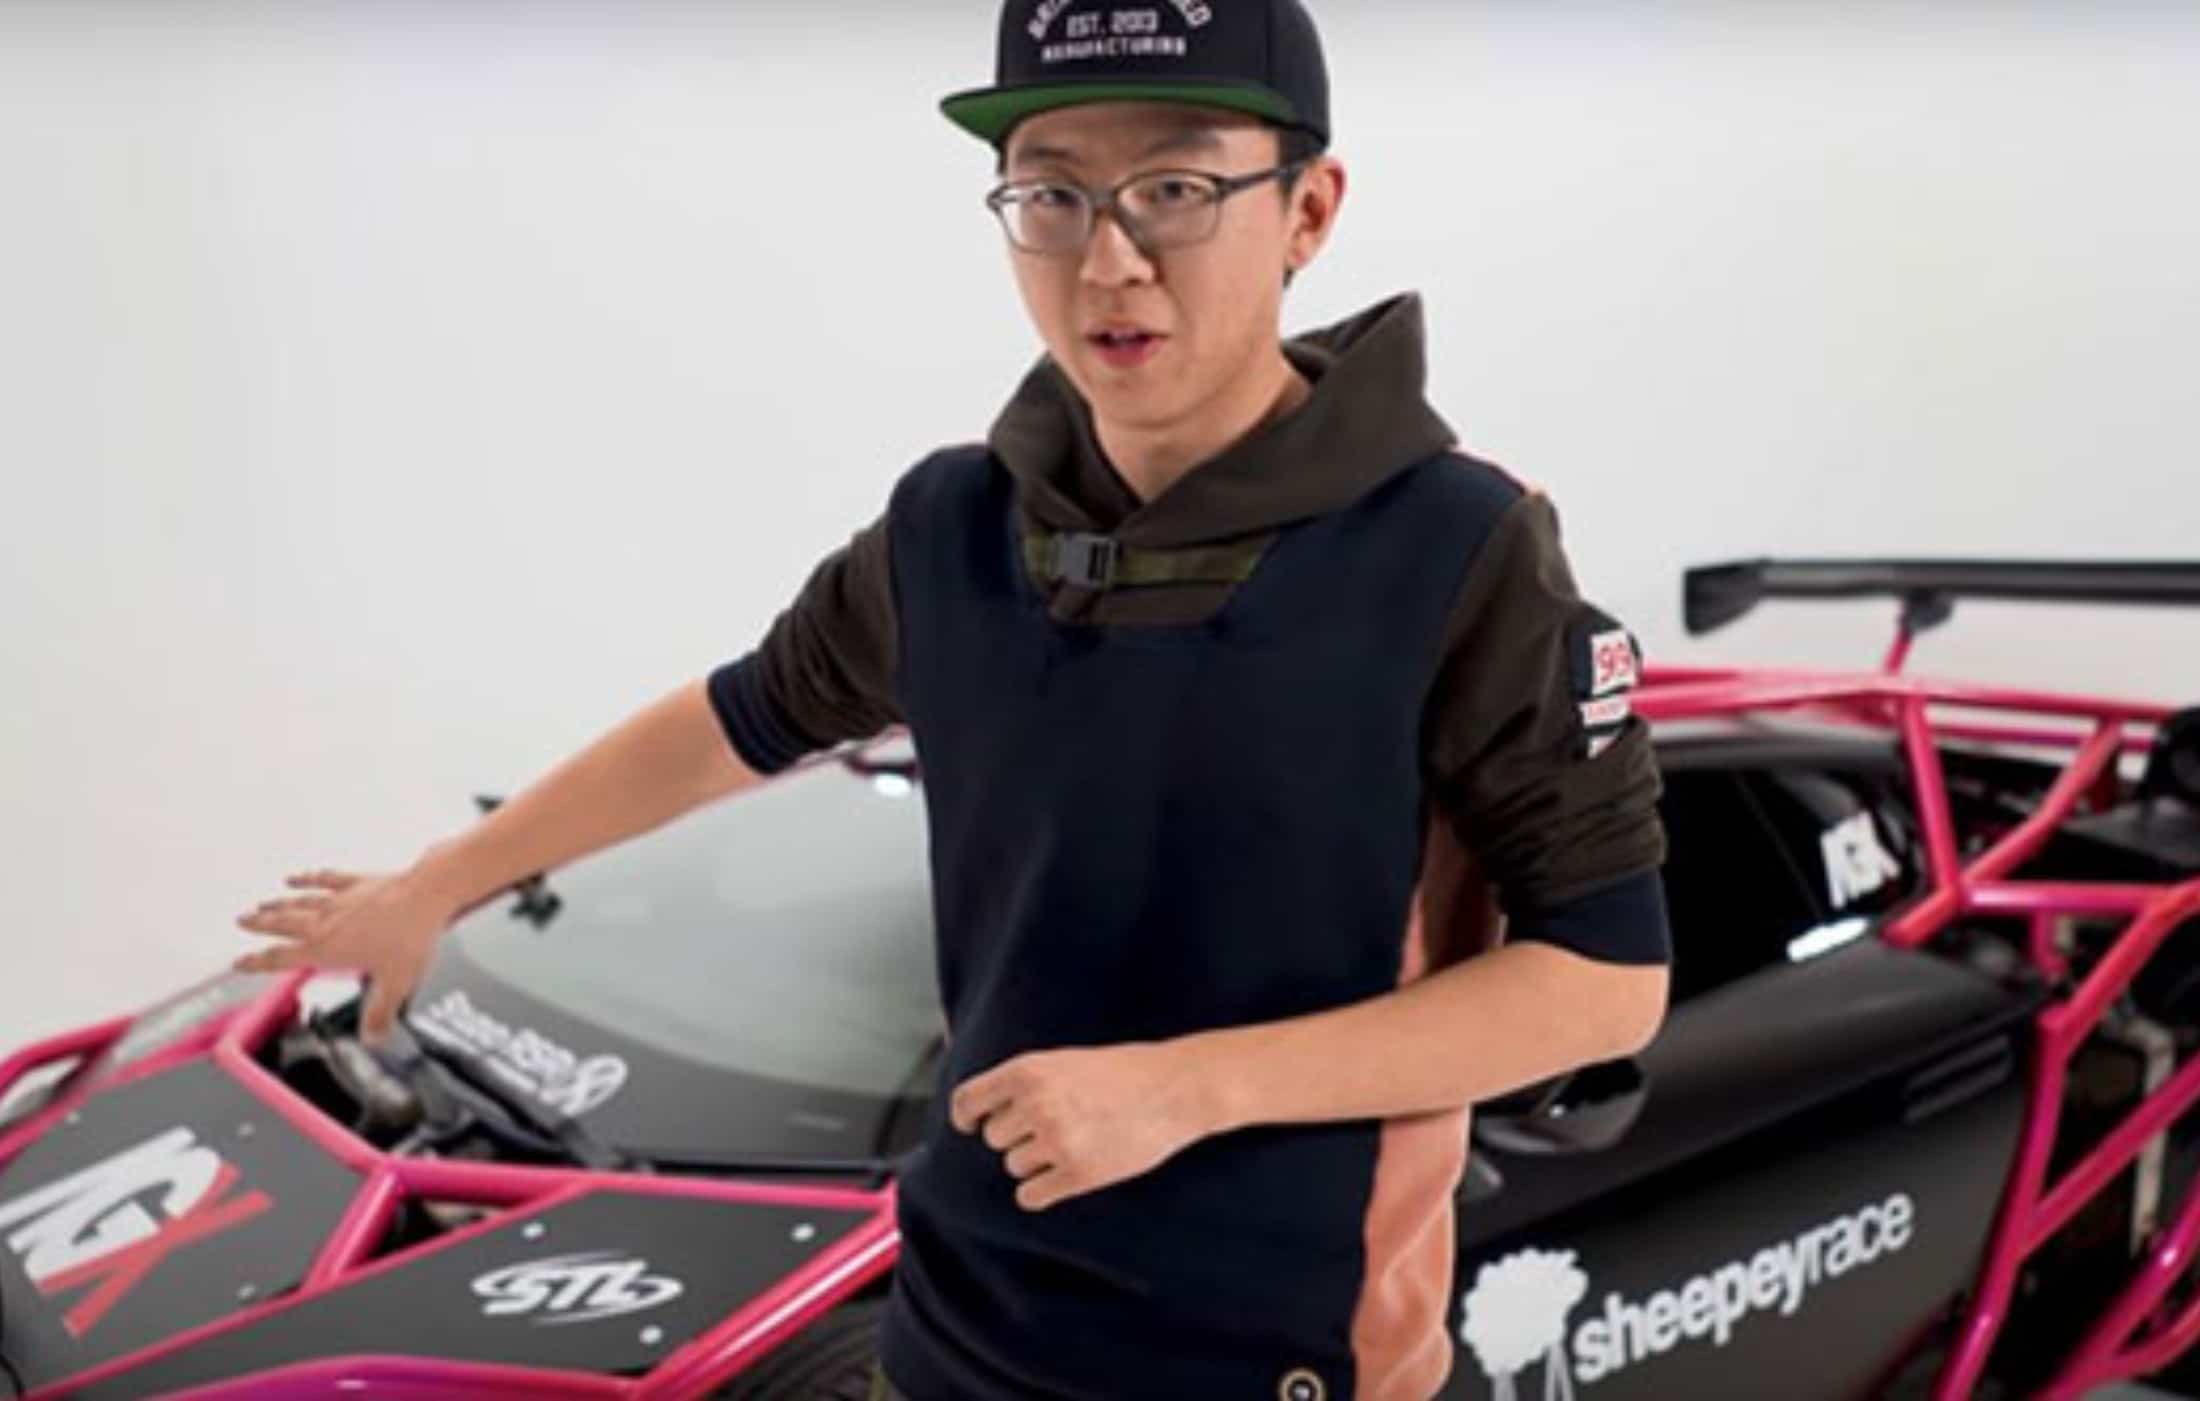 Alex Choi - From Mechanical Engineer To YouTube Star